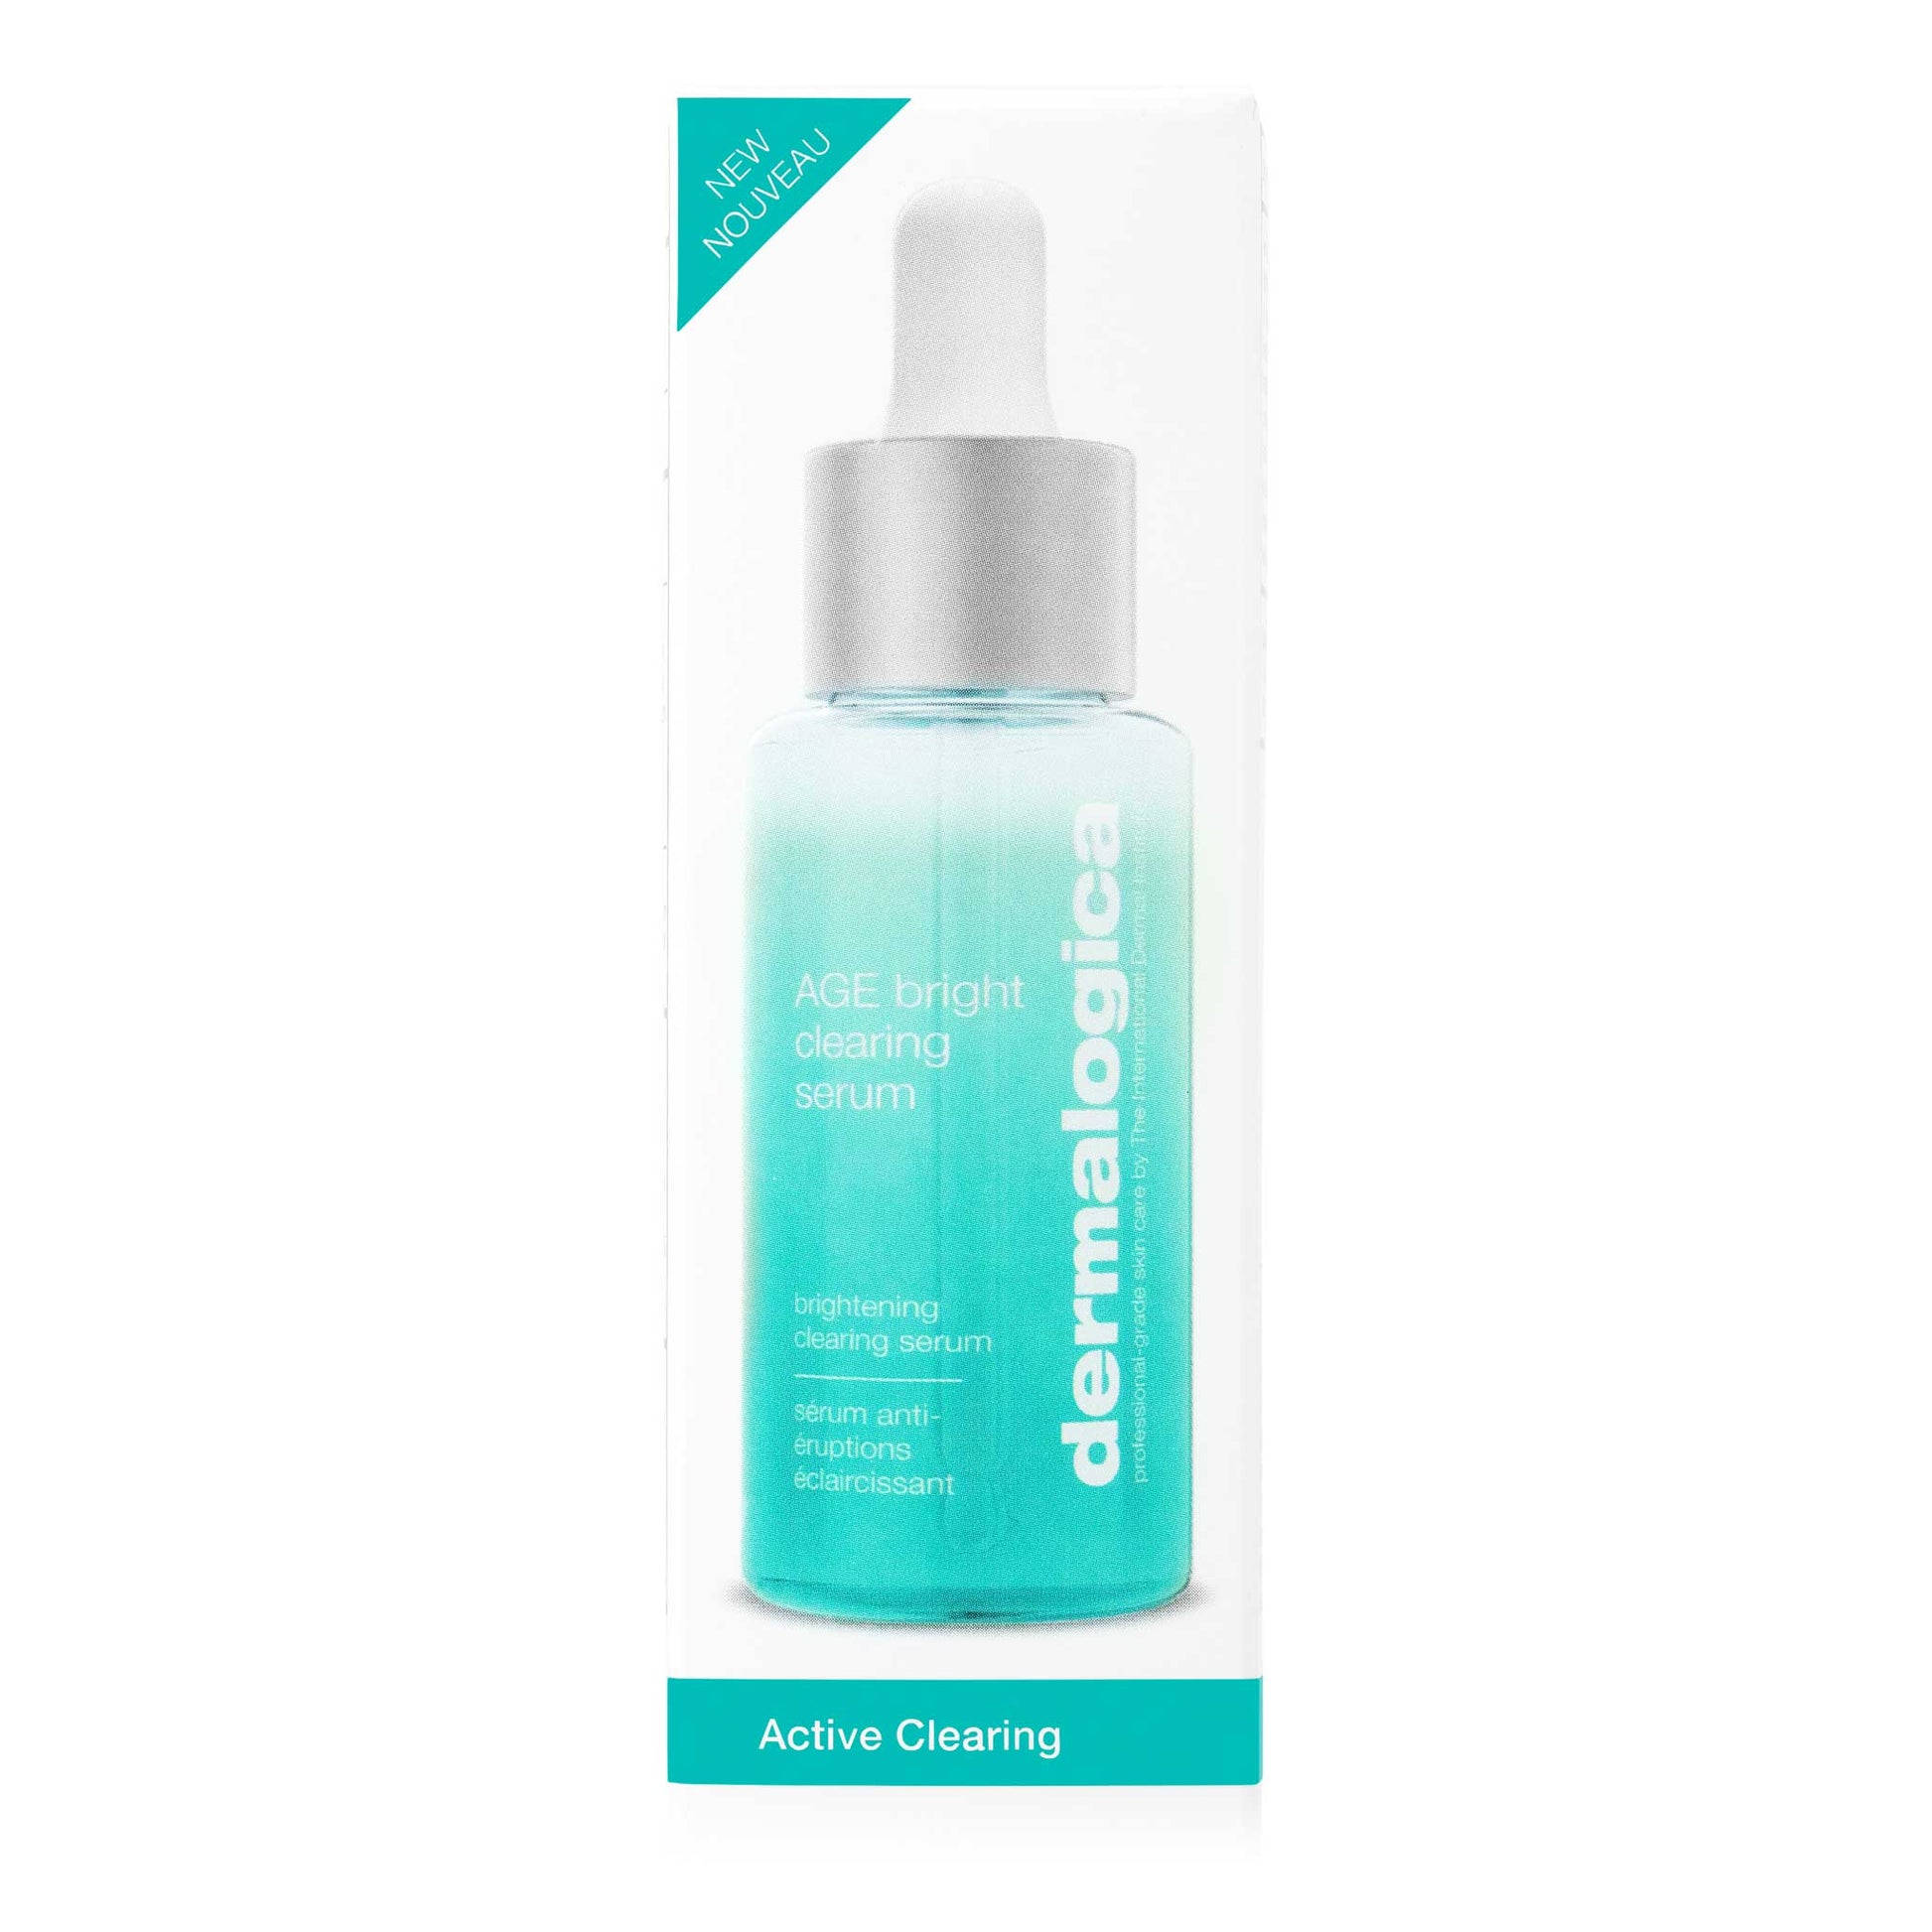 age bright clearing serum front of carton